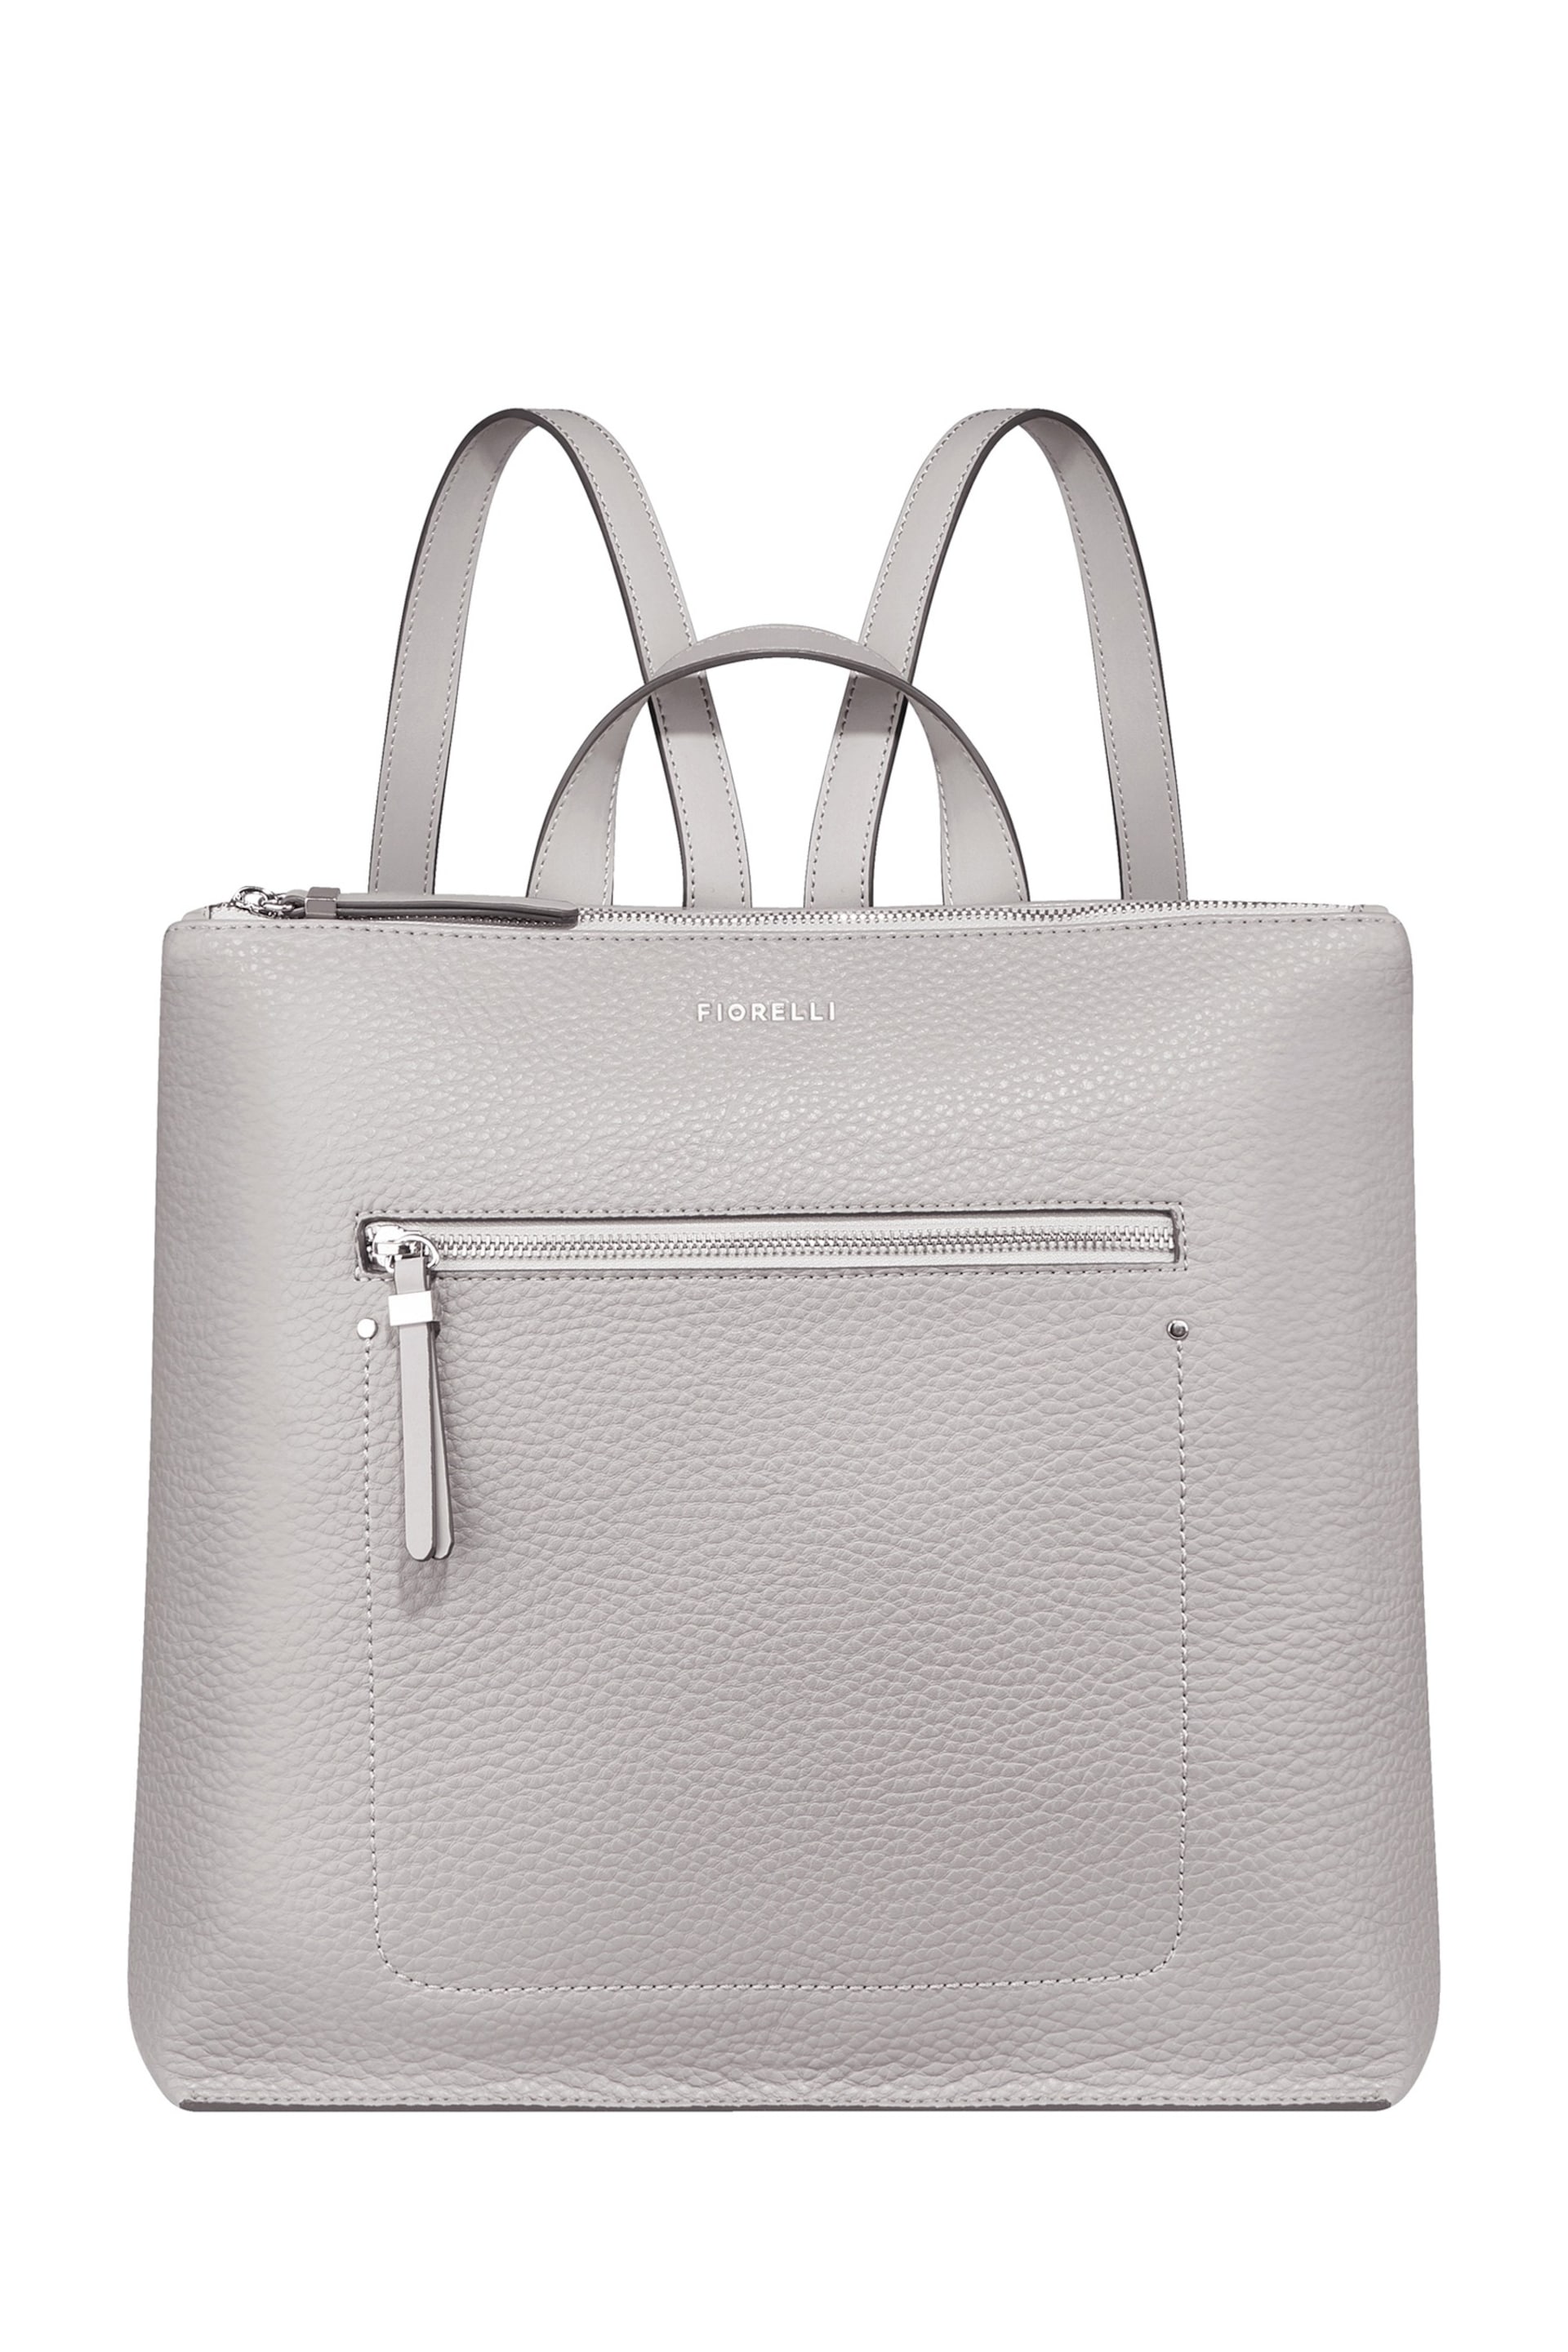 Fiorelli Finley Large Backpack - Image 1 of 4